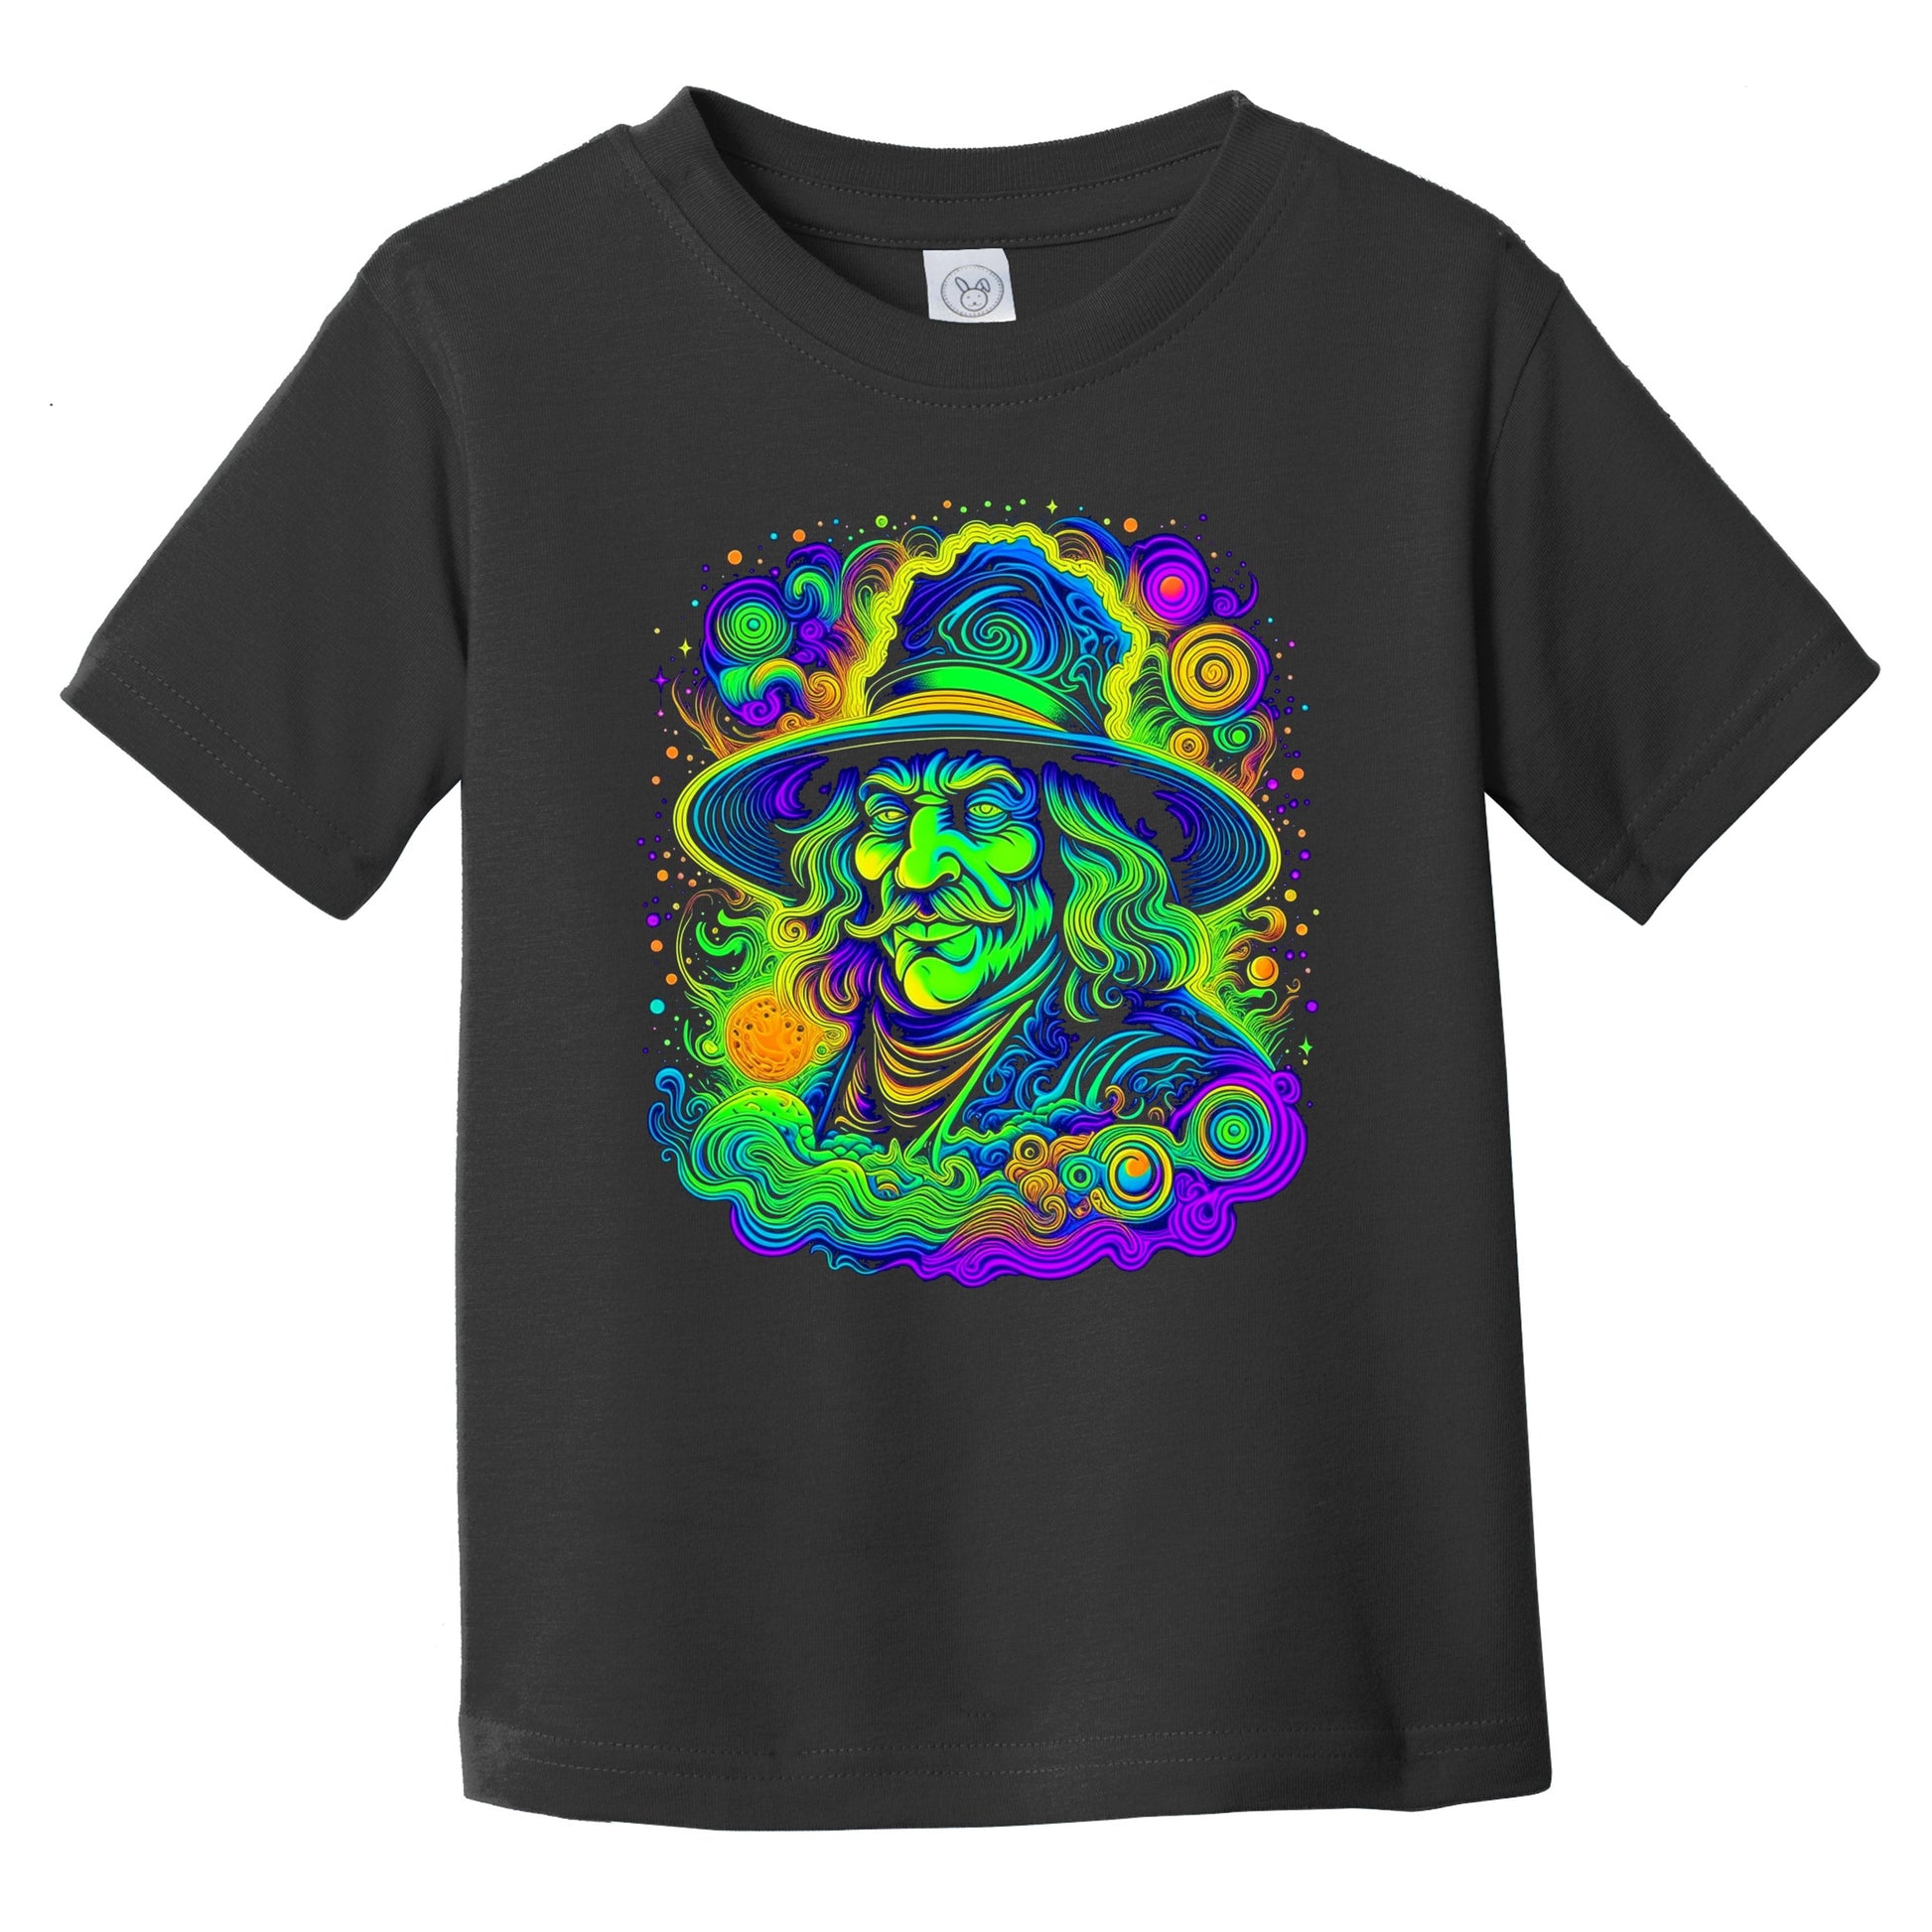 Colorful Bright Leprechaun Vibrant Psychedelic Wizard Art Infant Toddler T-Shirt